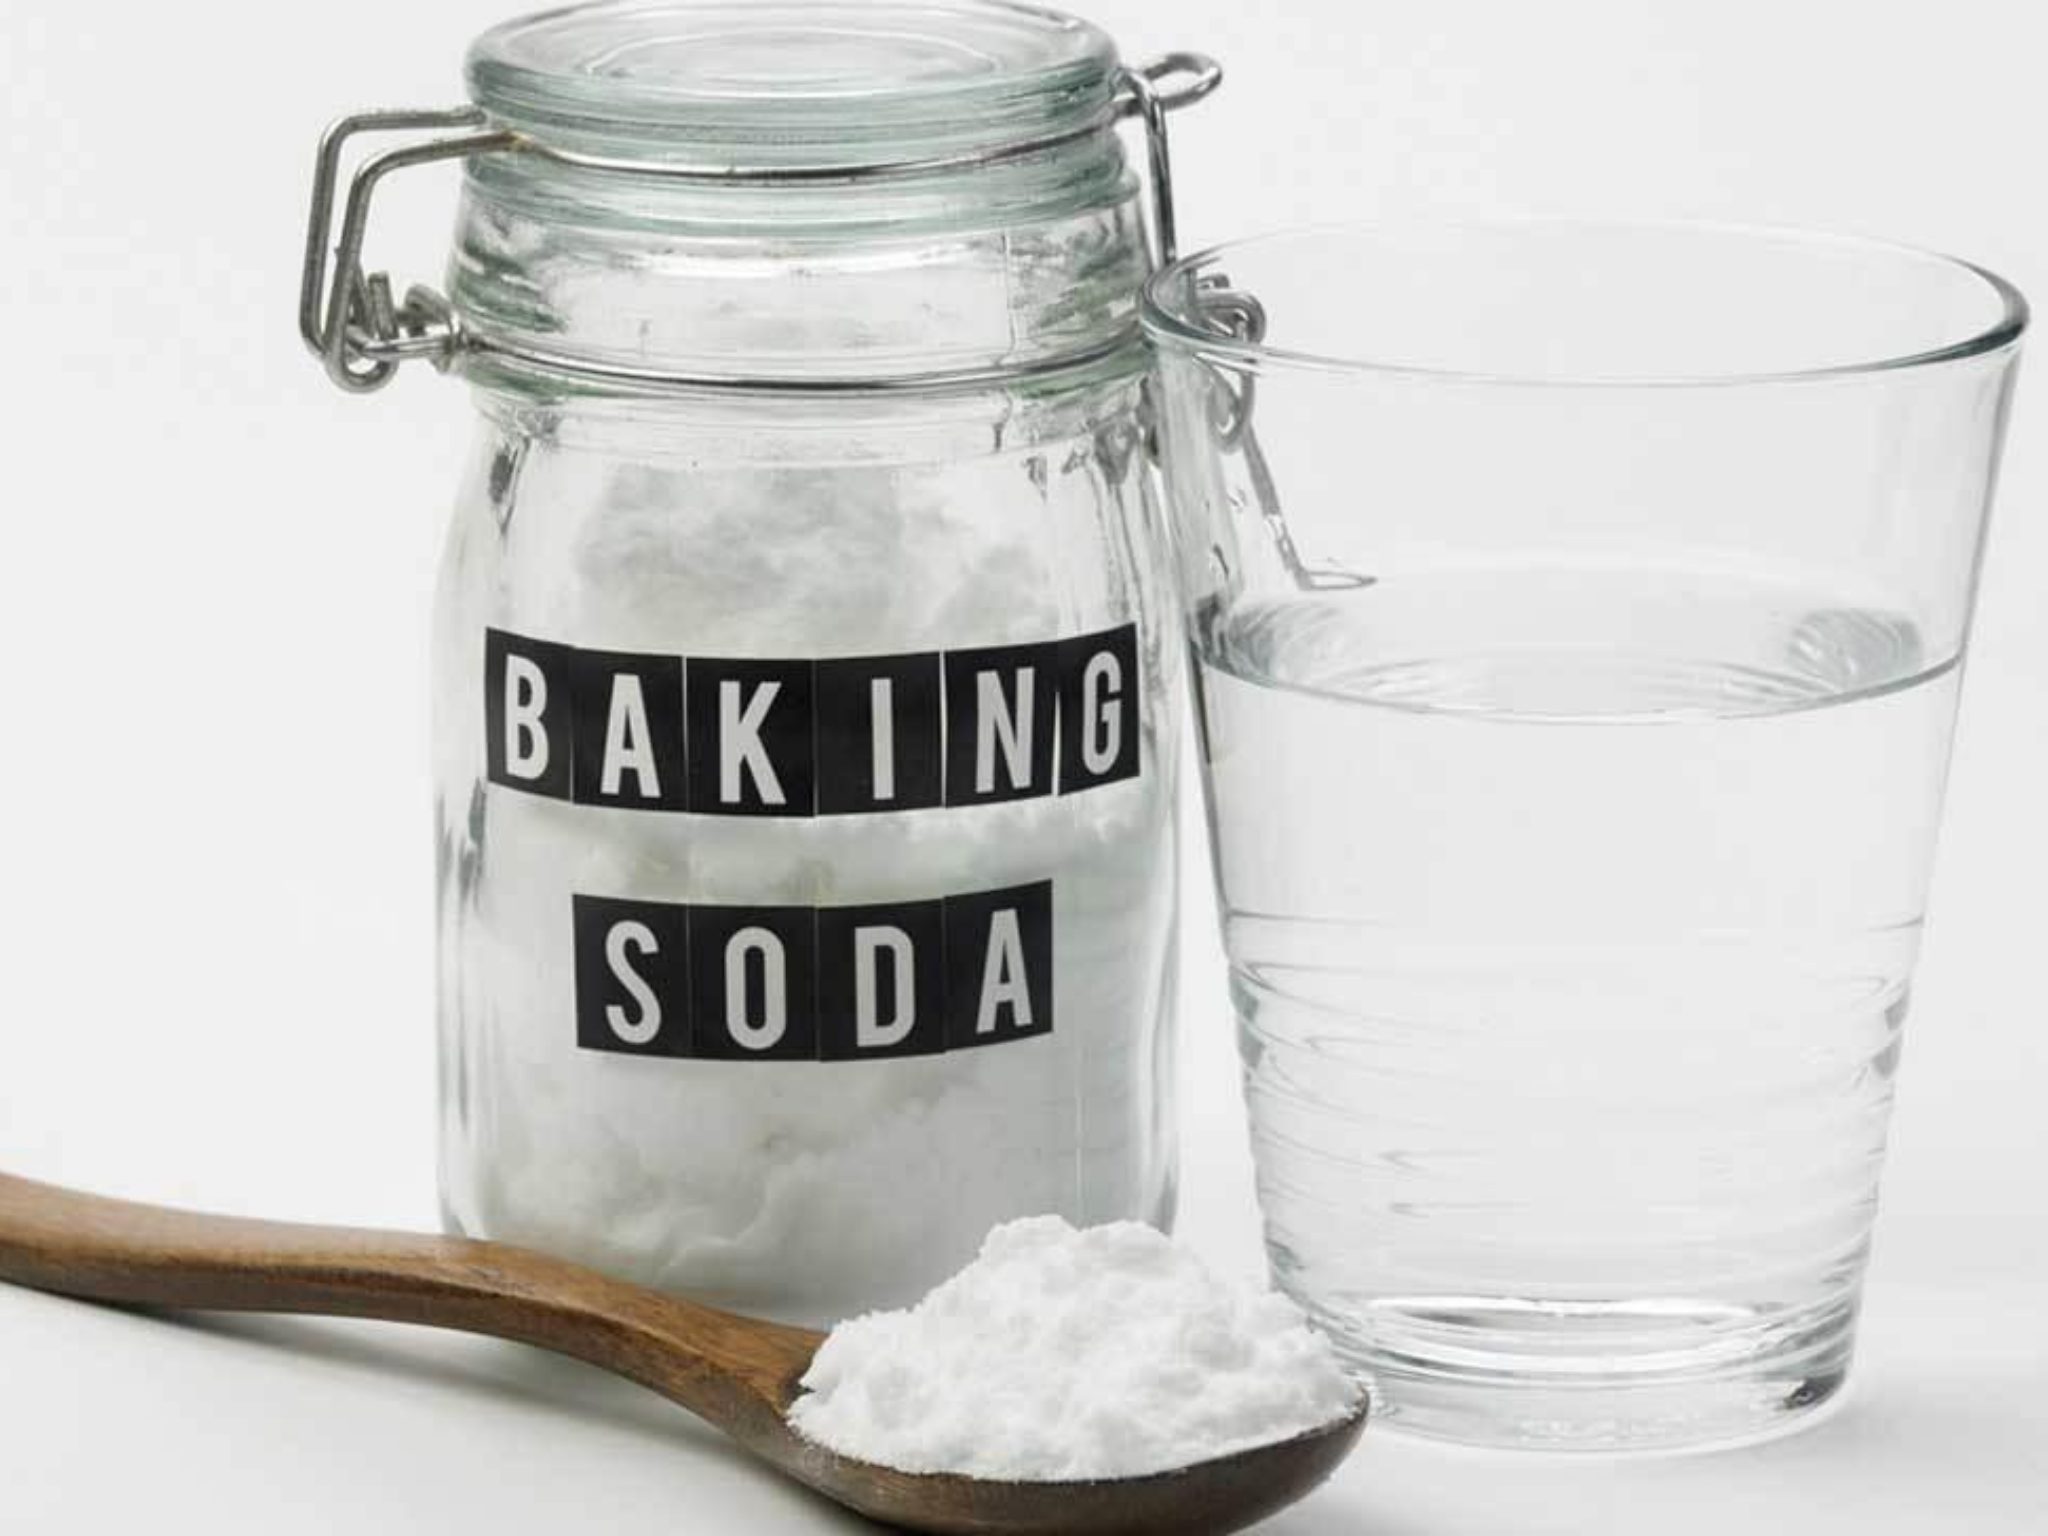 can you use baking soda on mattress